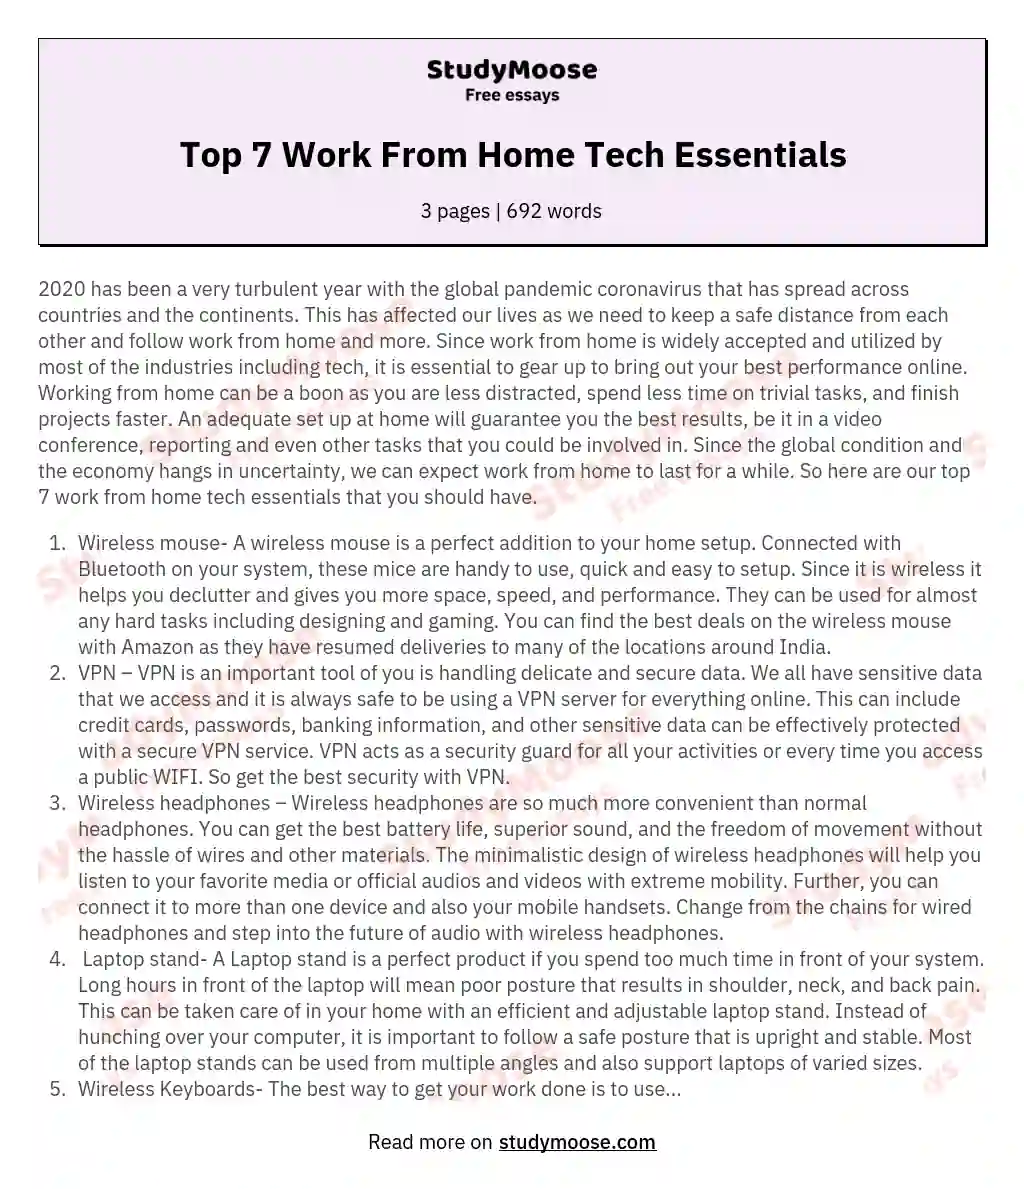 Top 7 Work From Home Tech Essentials